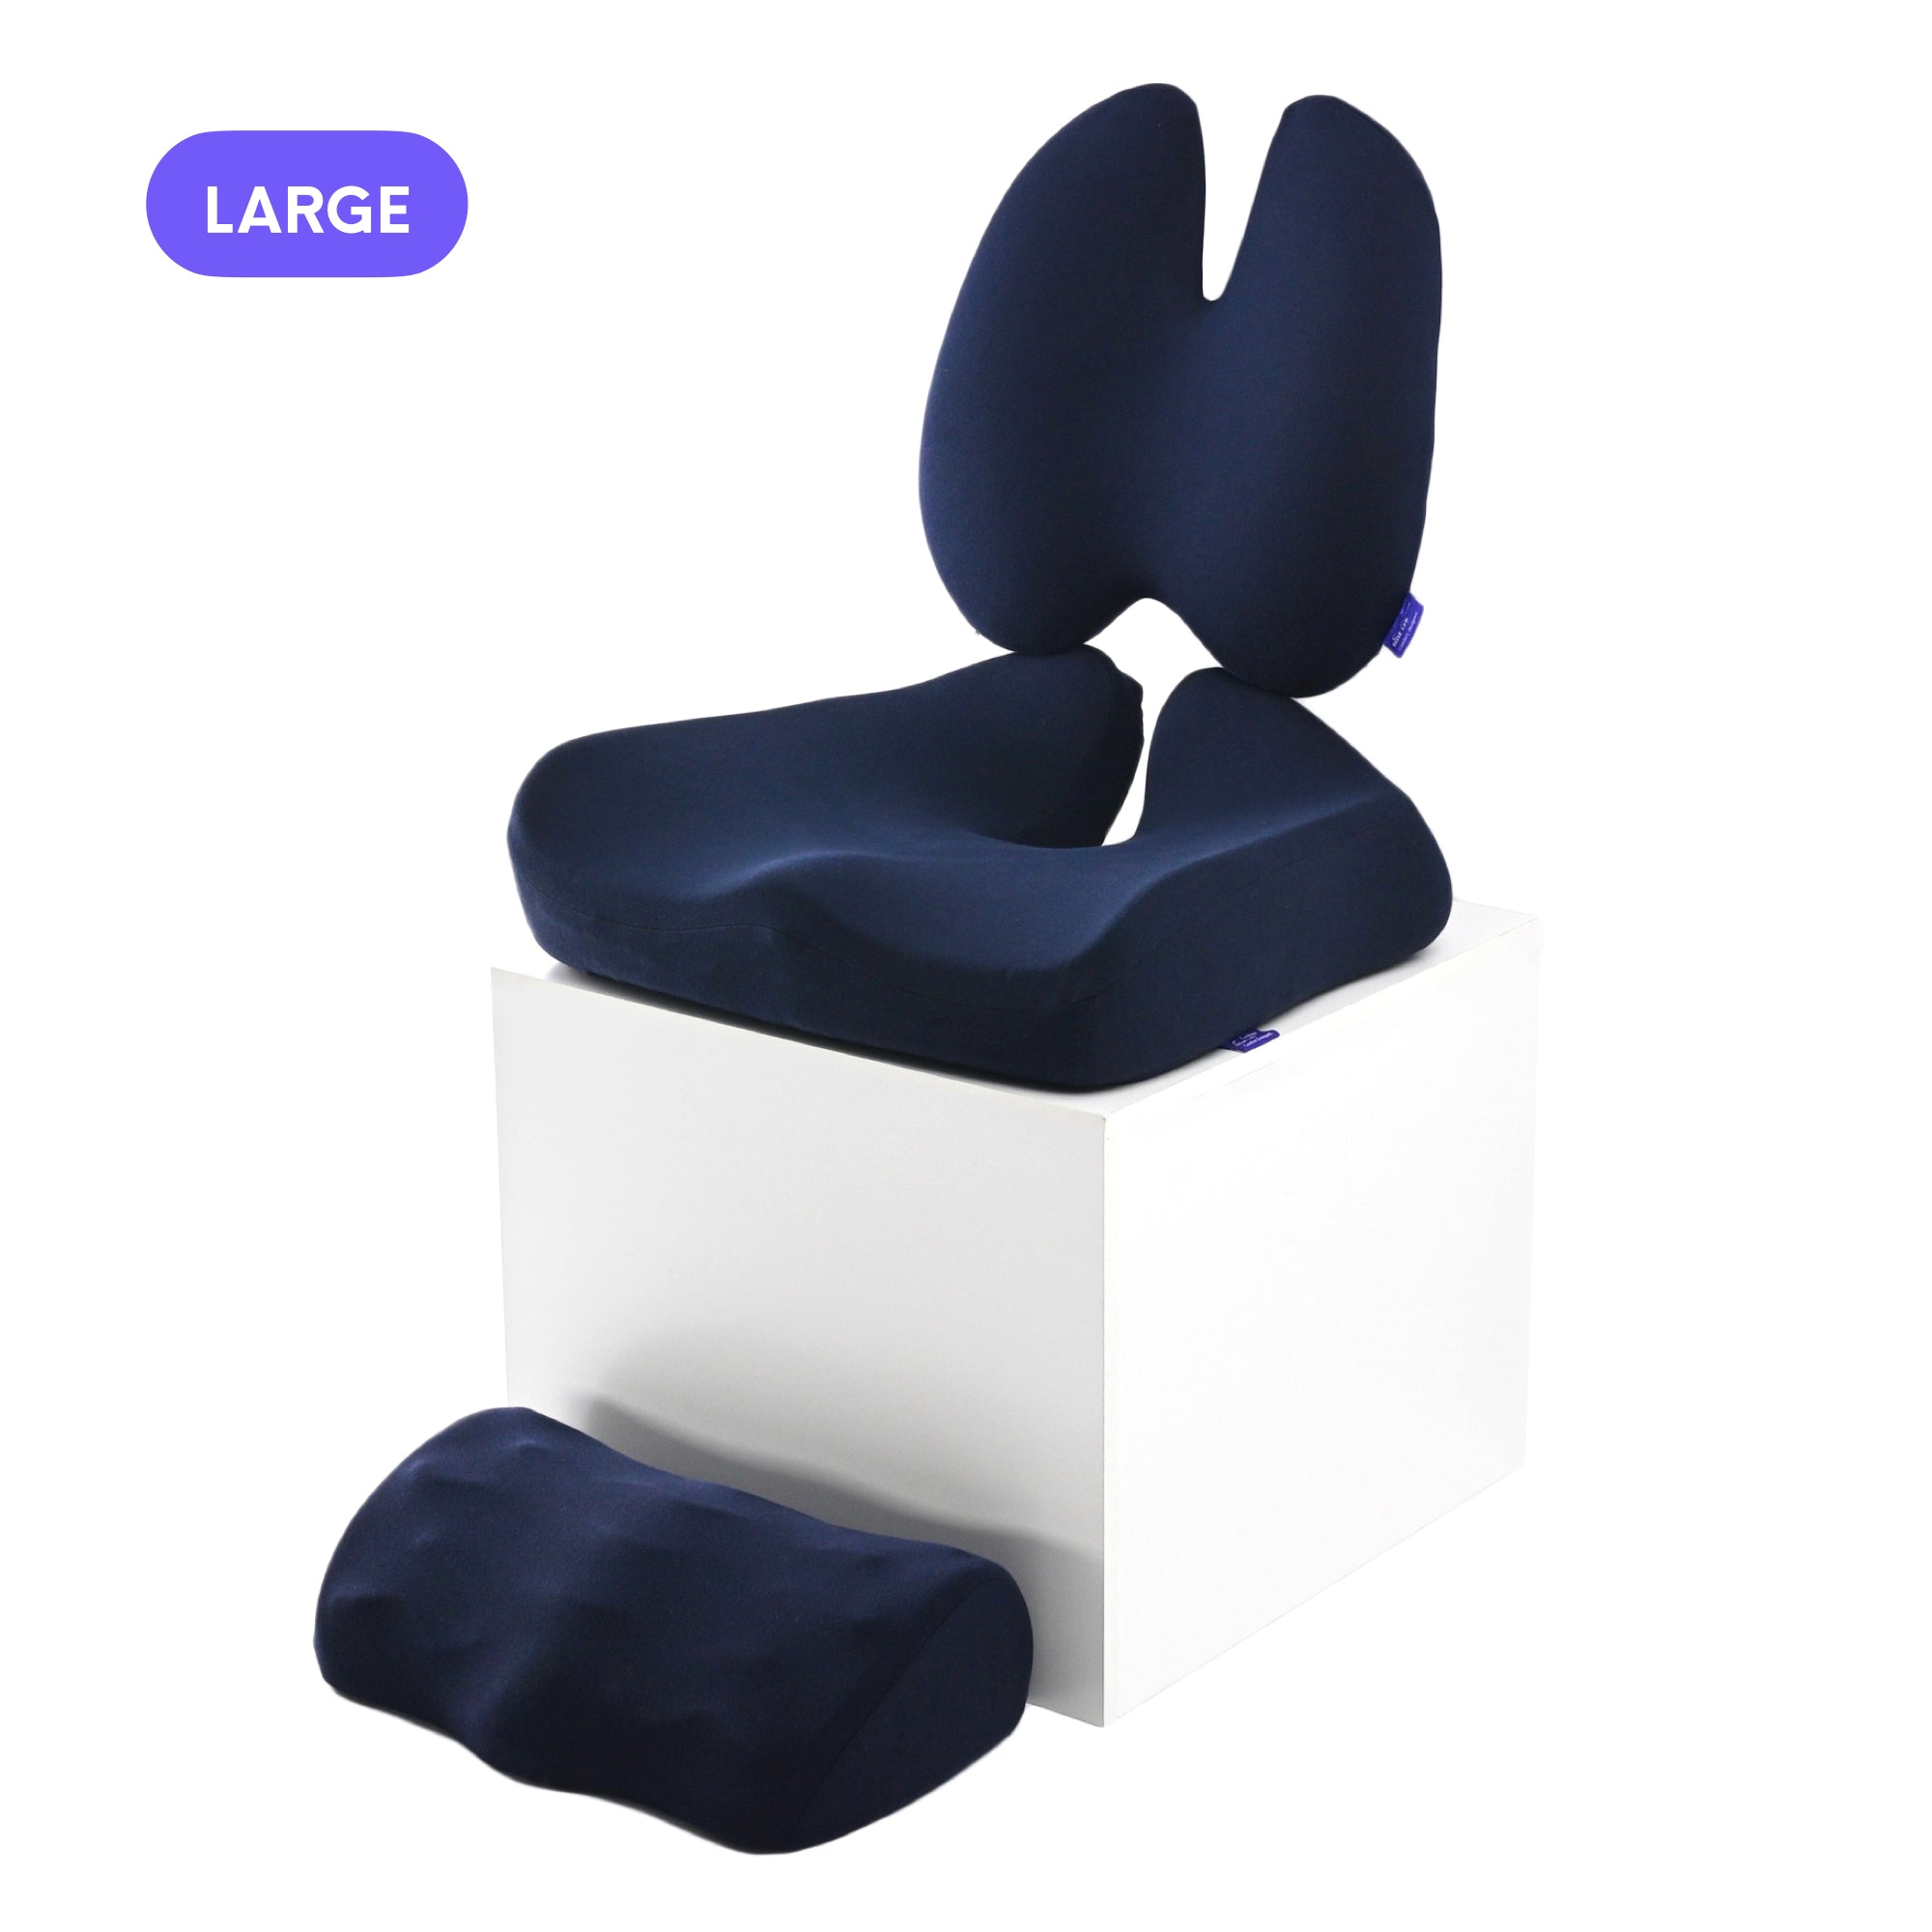 Bundle Offer: Complete Seat Cushion and Back Support Set – Nuage